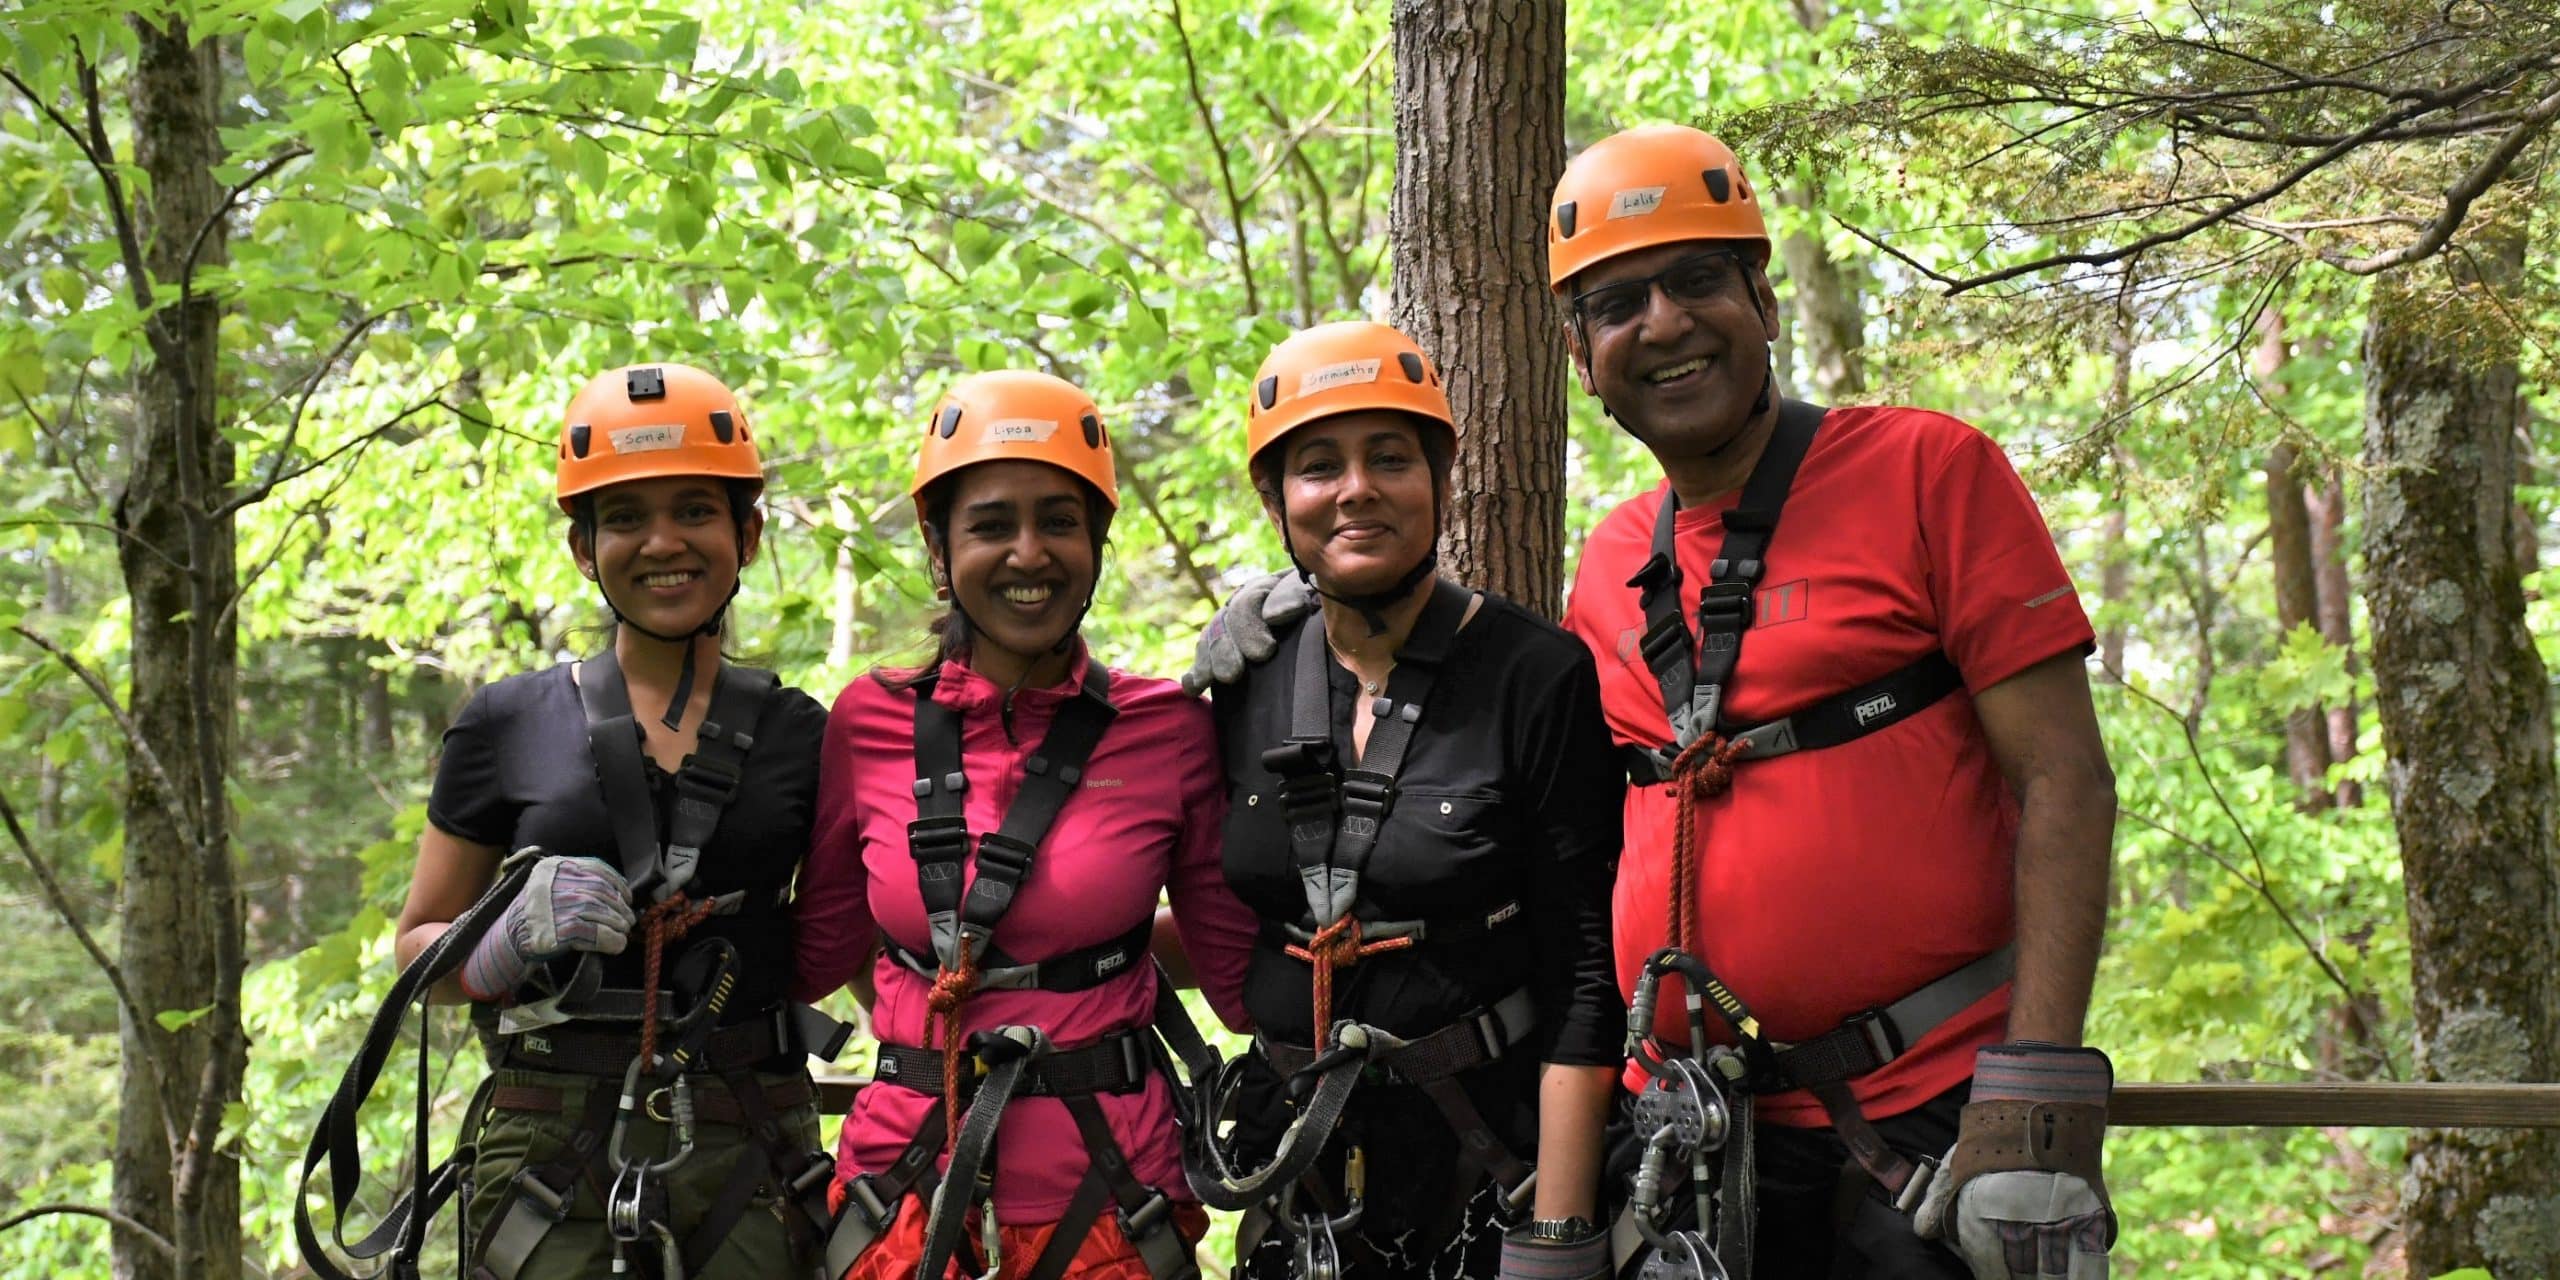 Smiling family standing together on a platform at Zoar's Canopy tour